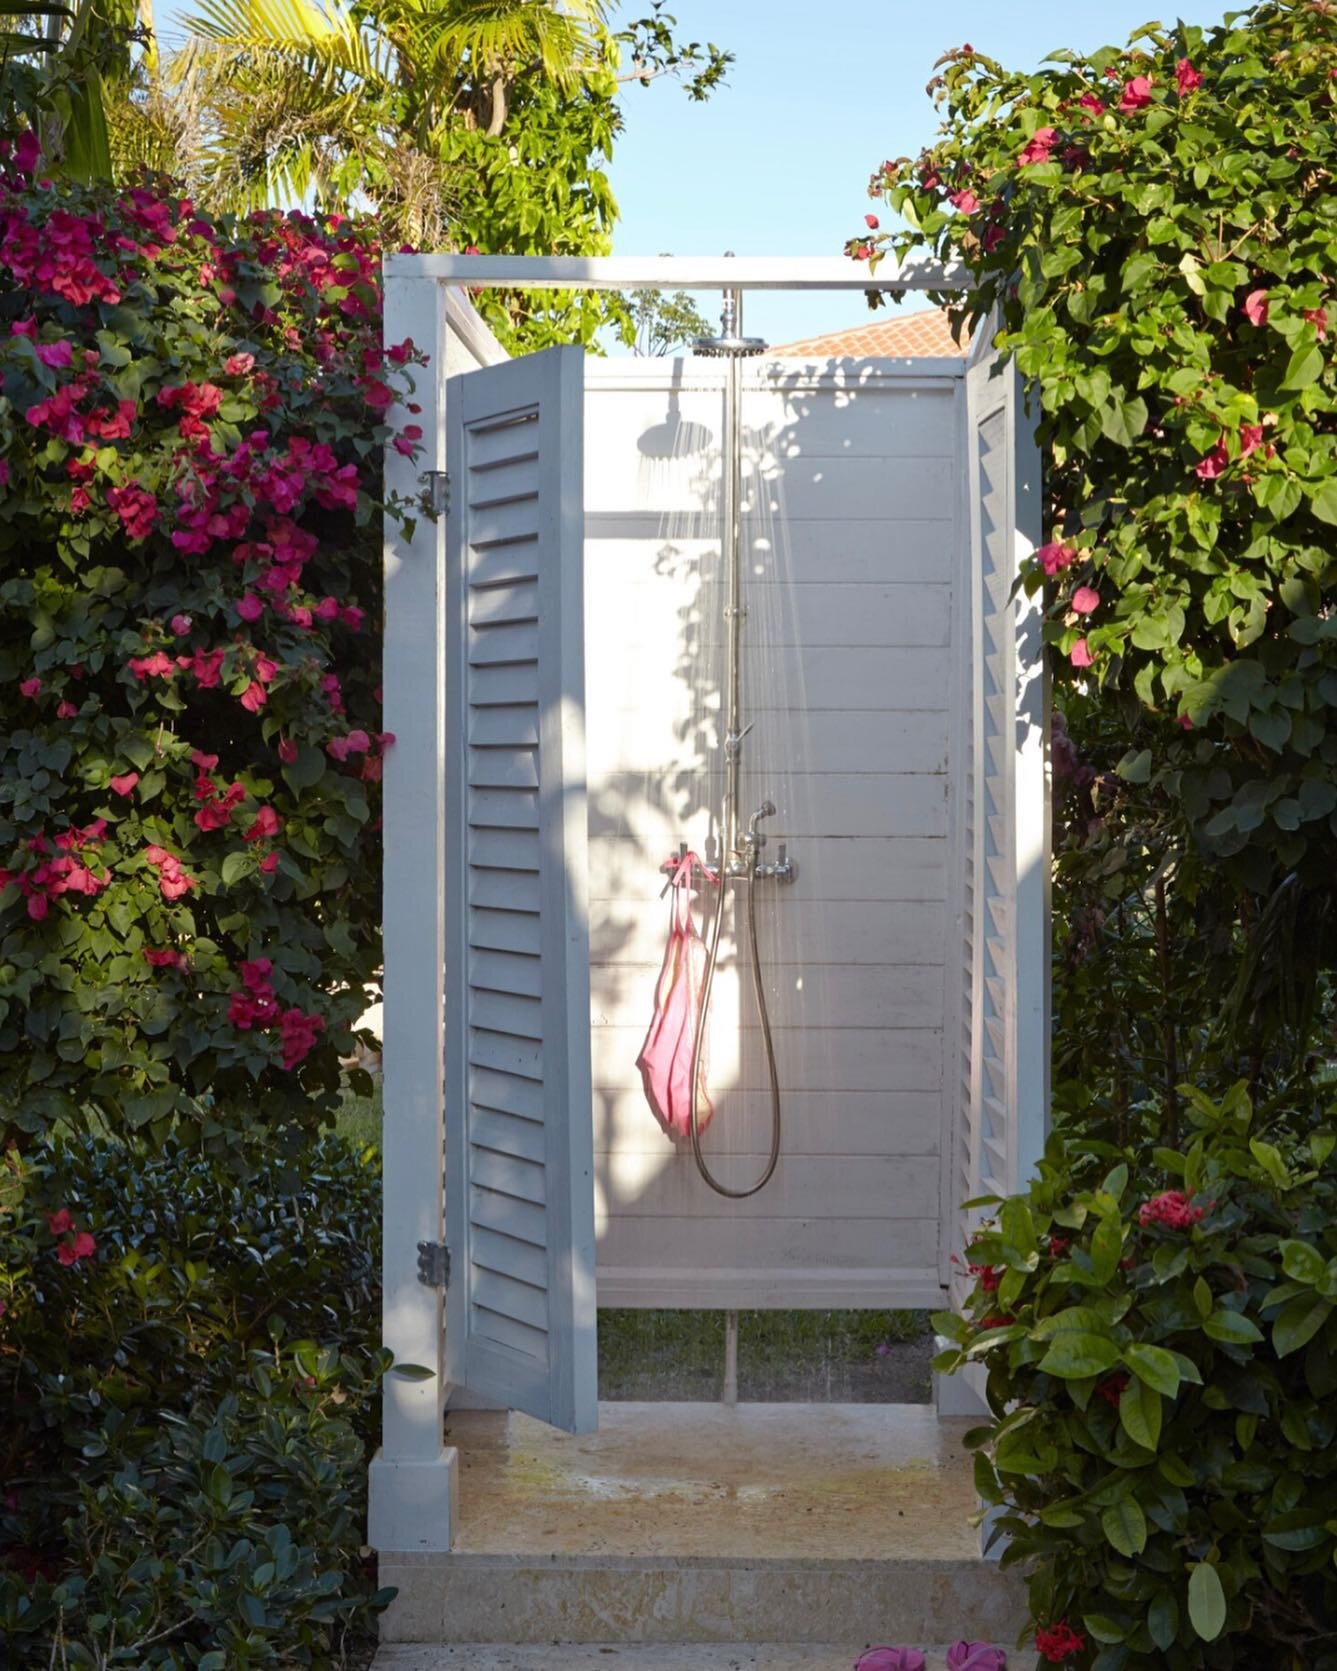 My forever home will have an outdoor shower. #retirementplanning Design by @lindrothdesign